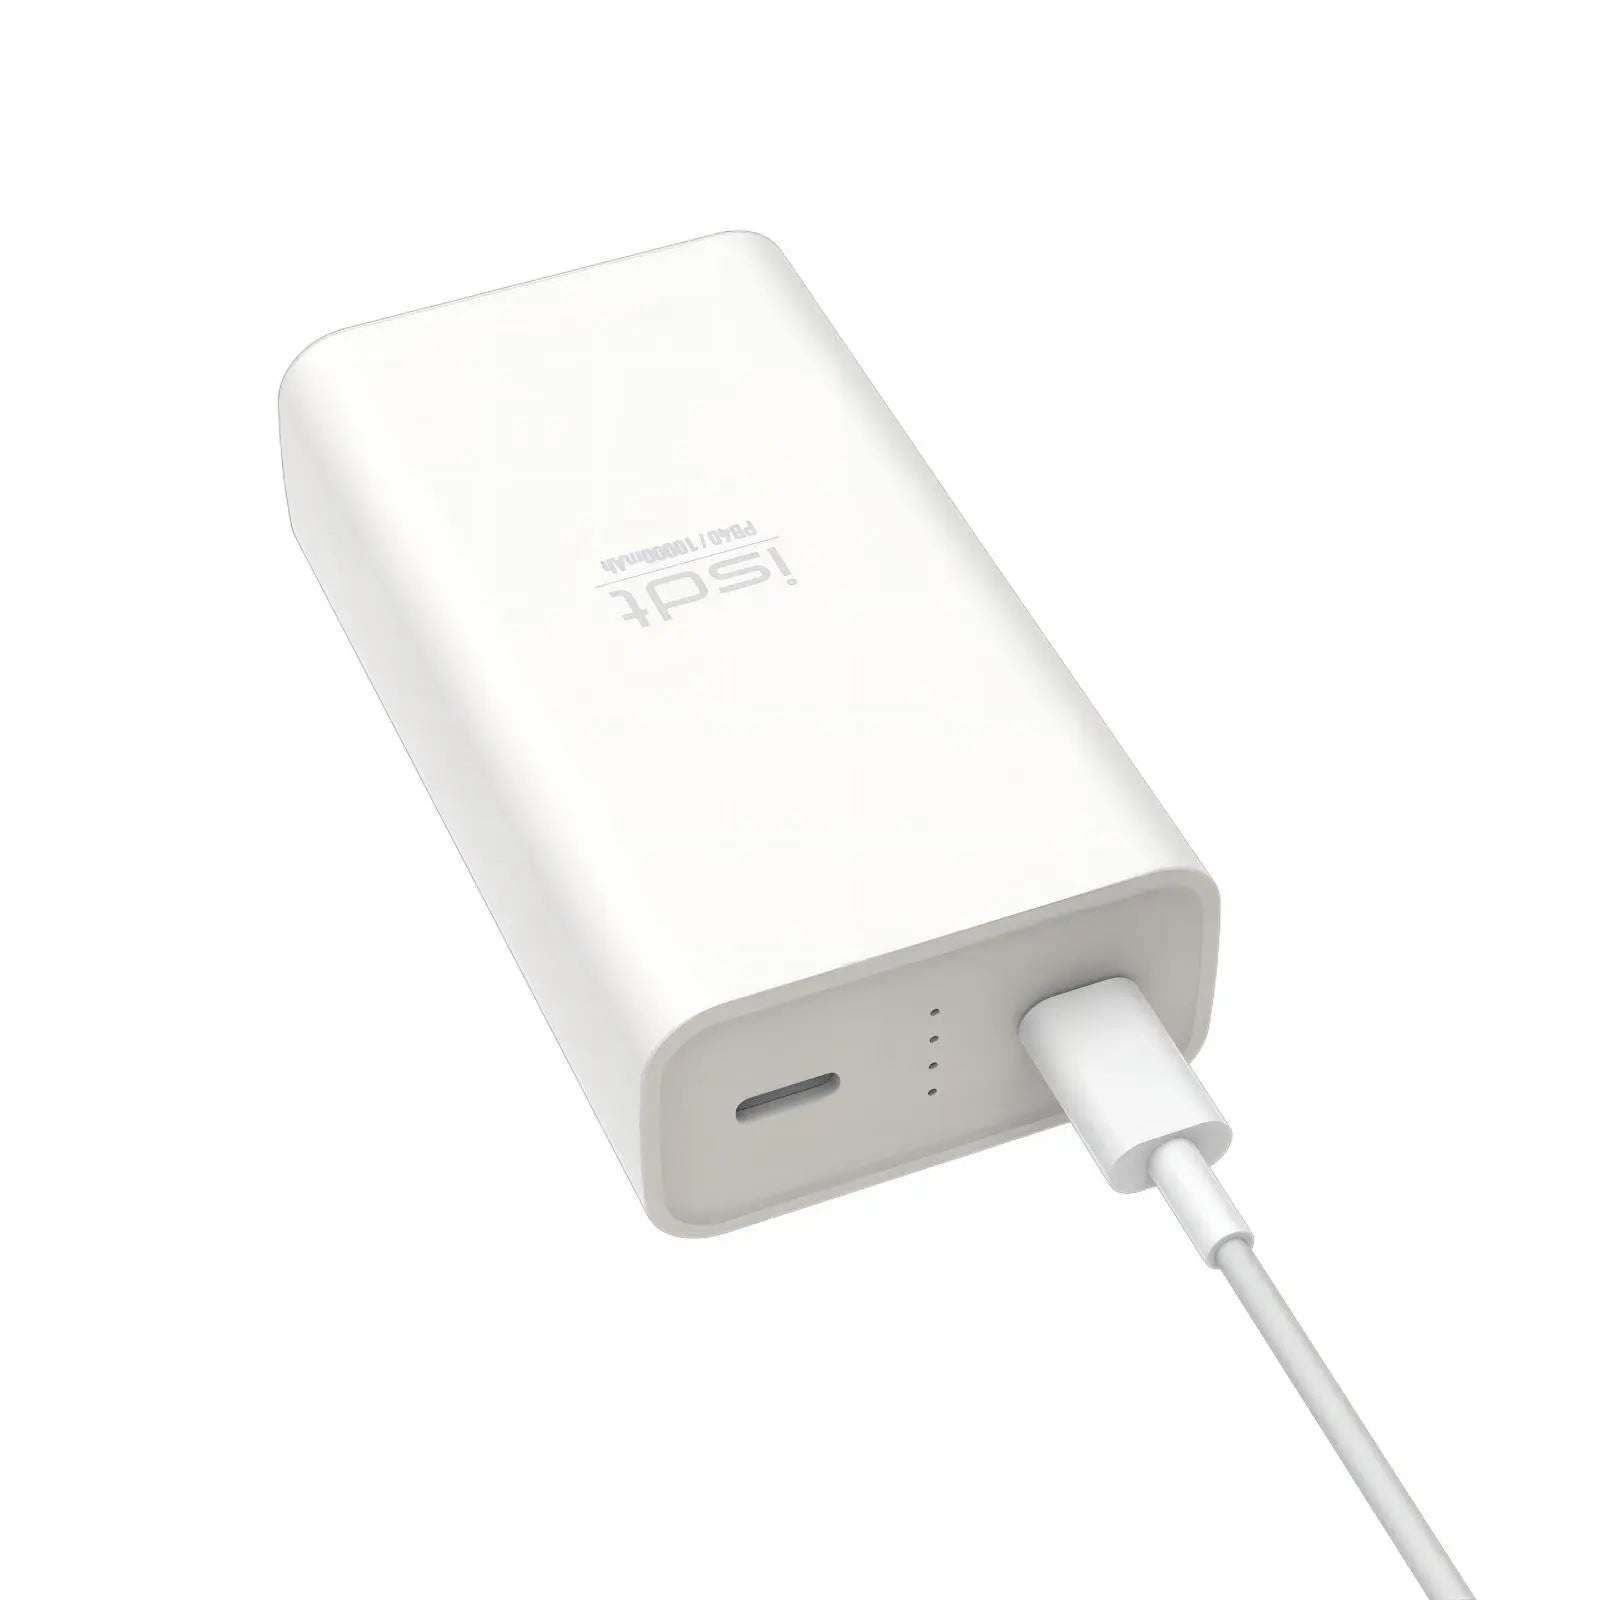 Chargeur multi-pays USB Type C PD, 18W